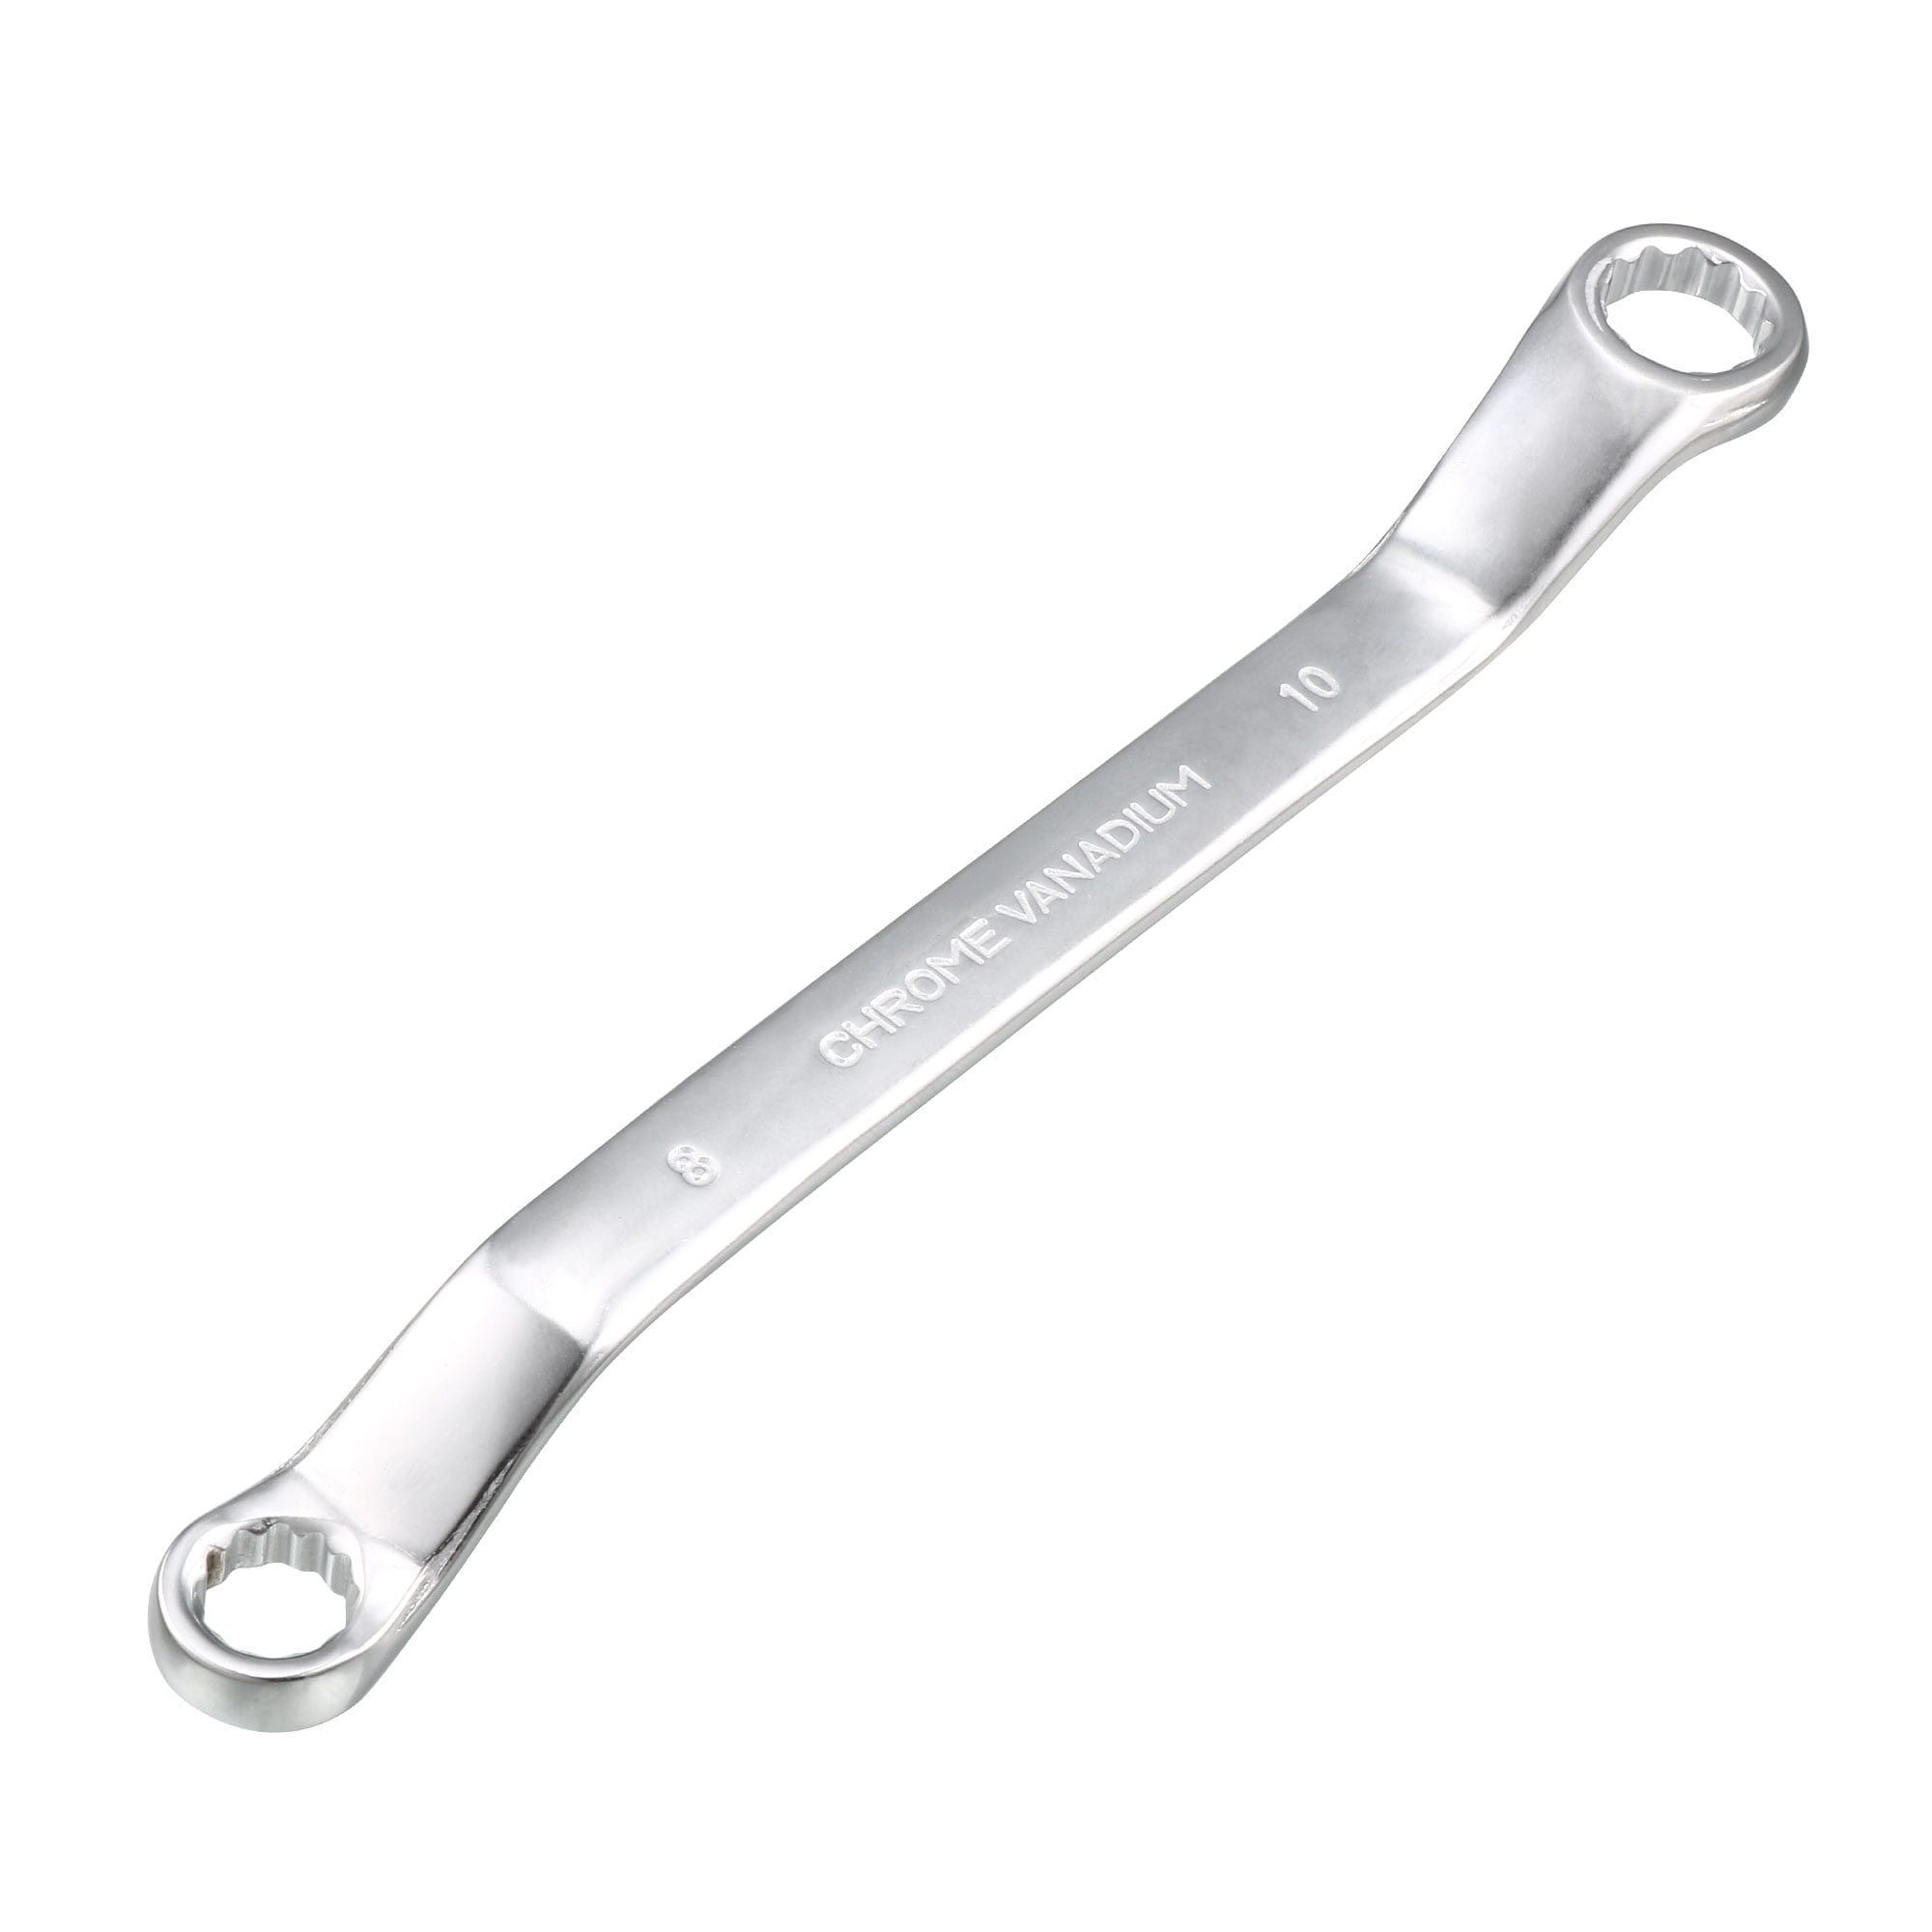 Uxcell a15010500ux0875 Replacemnt 8mm 10mm Double Side Offset Combination Box End Wrench